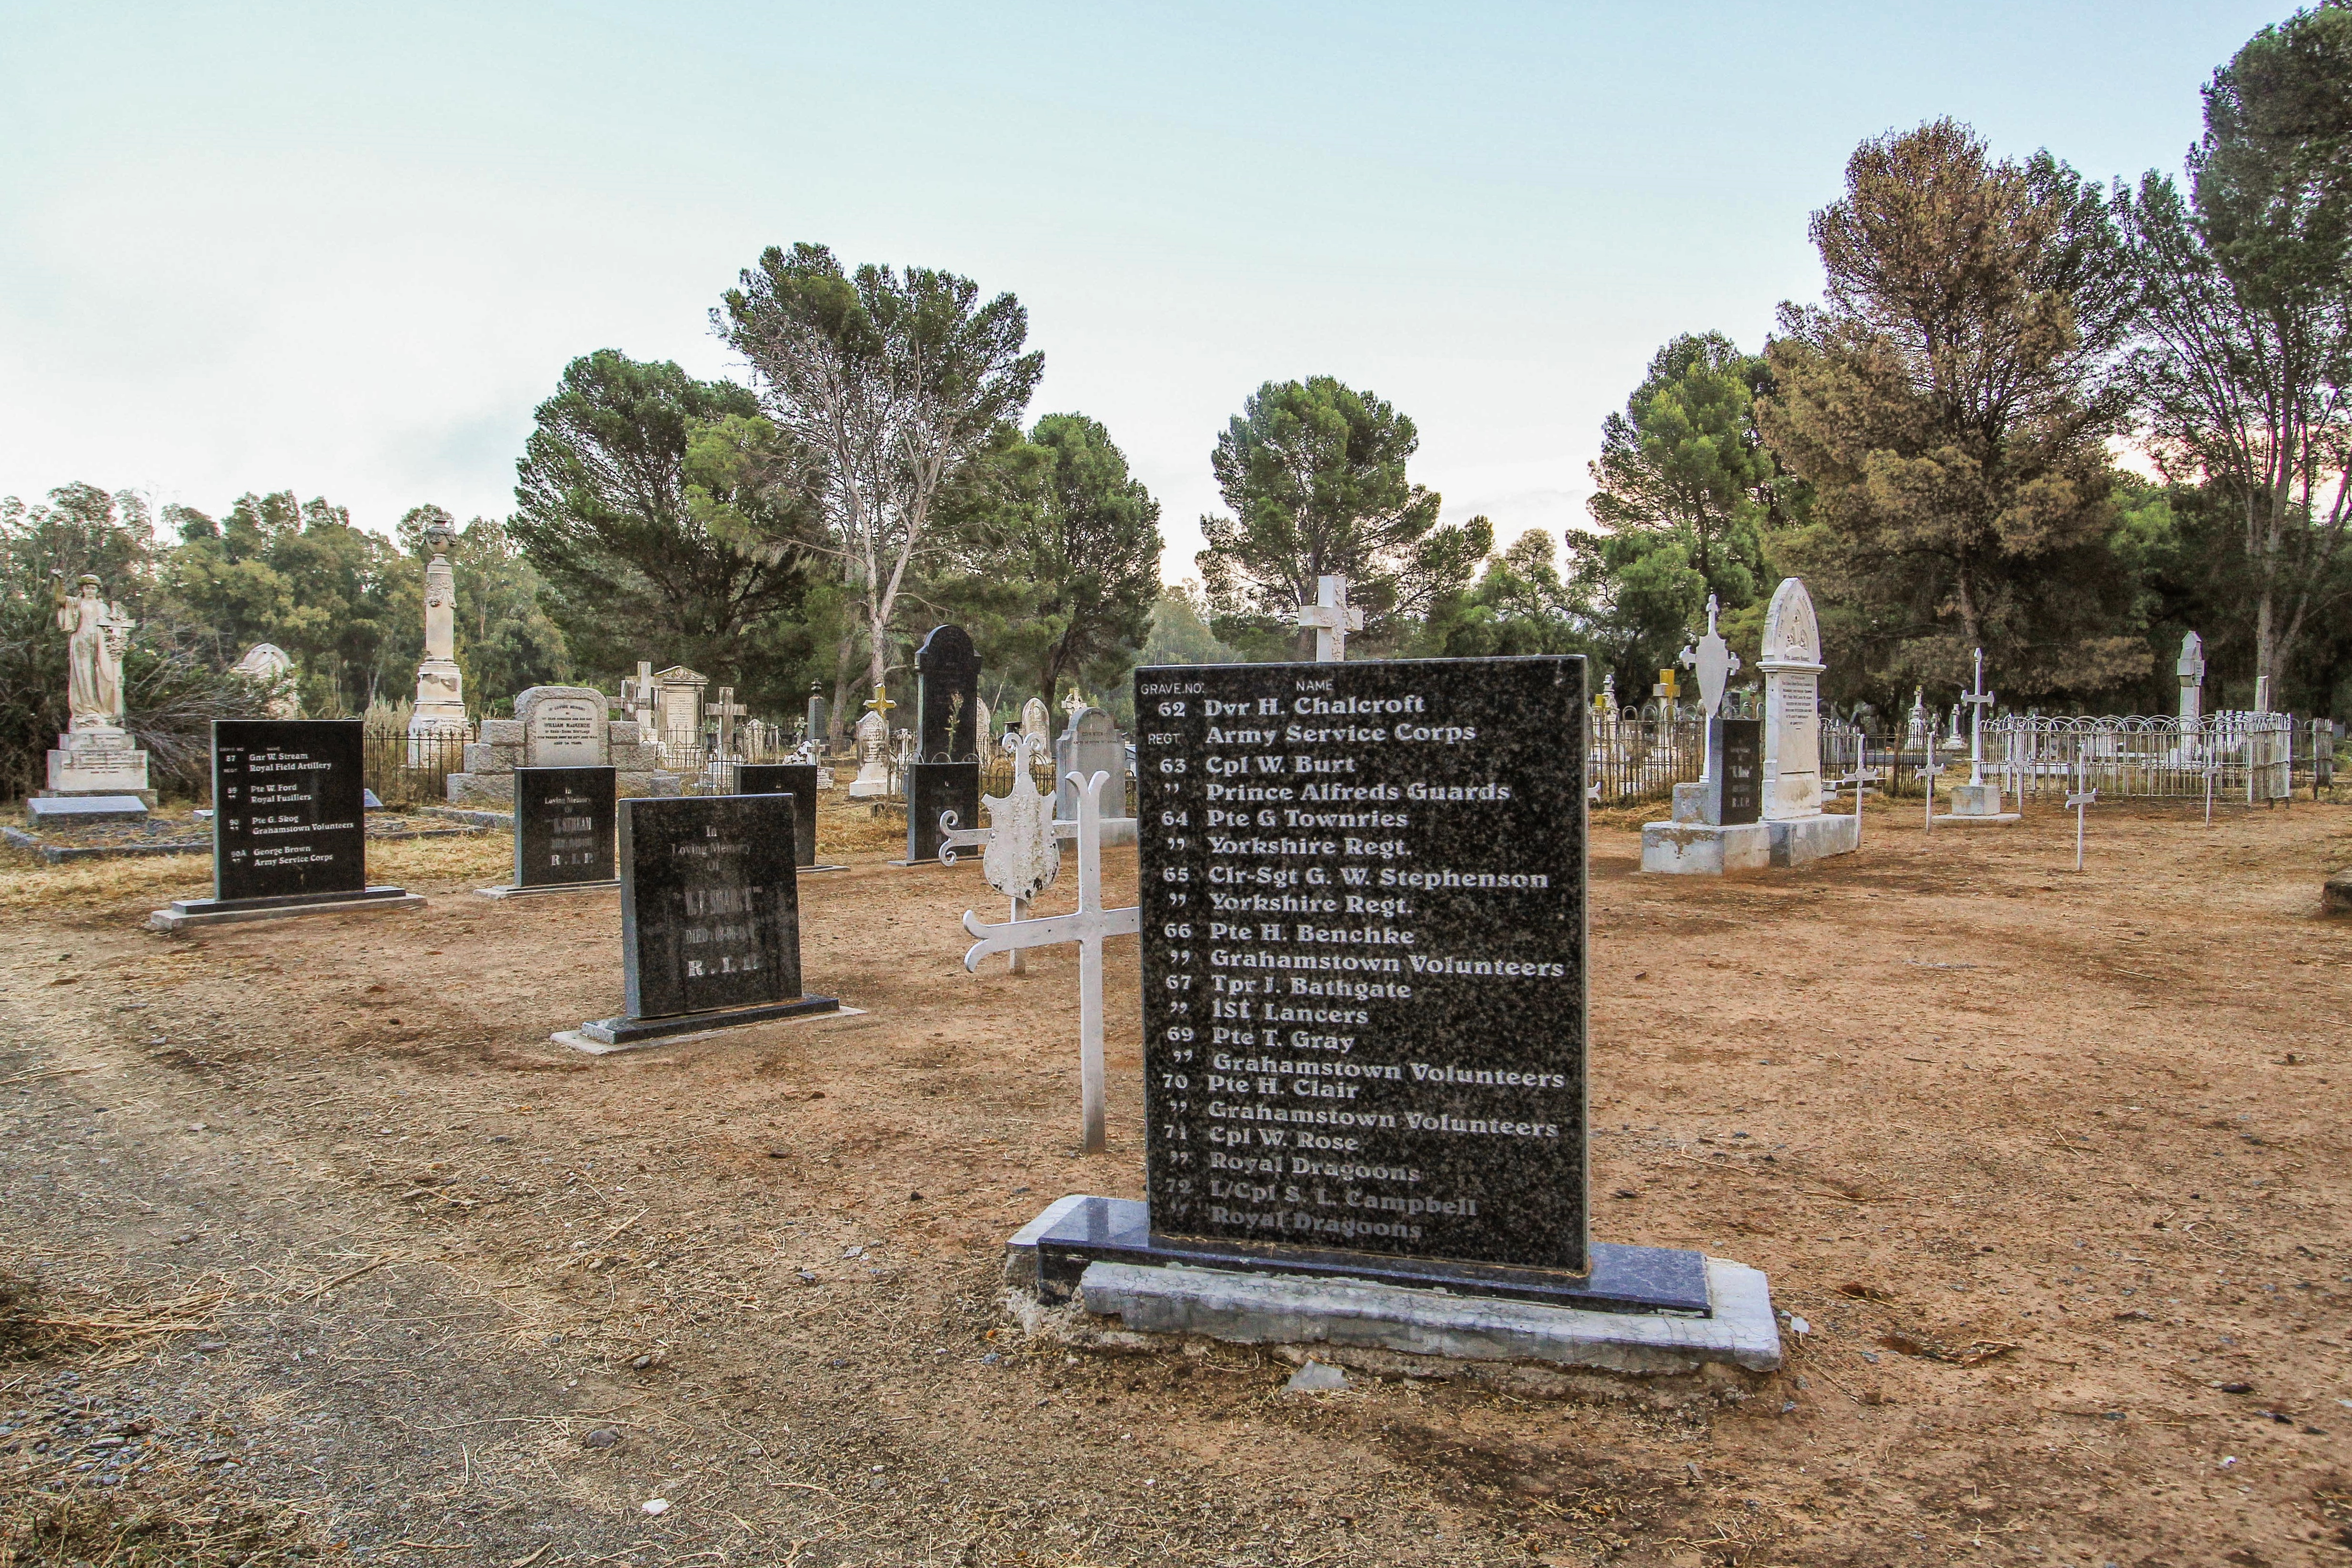 British soldiers at rest in the Cradock town cemetery. Image: Chris Marais